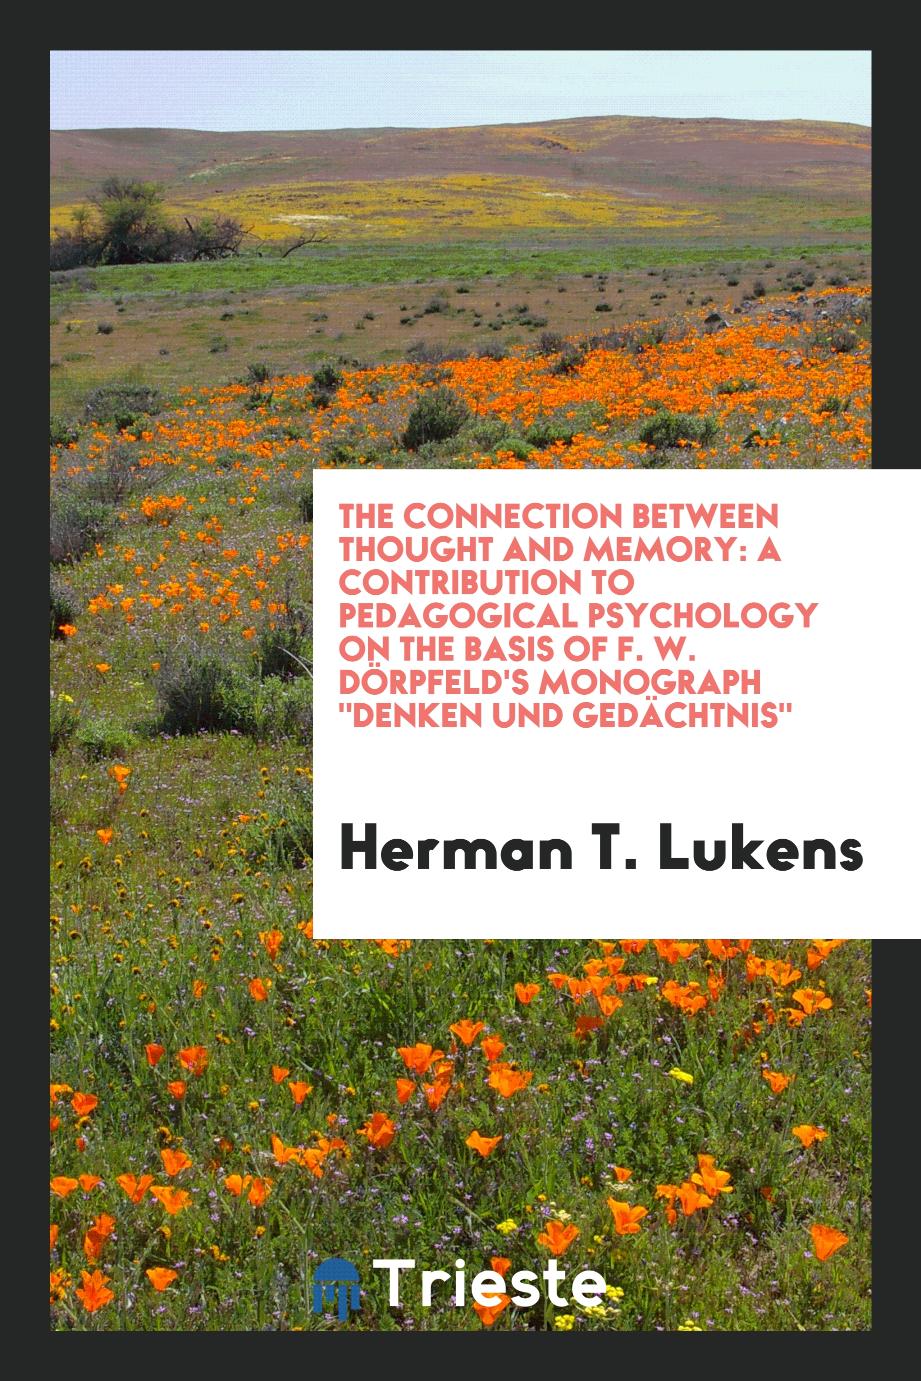 The Connection Between Thought and Memory: A Contribution to Pedagogical Psychology on the Basis of F. W. Dörpfeld's Monograph "Denken und Gedächtnis"